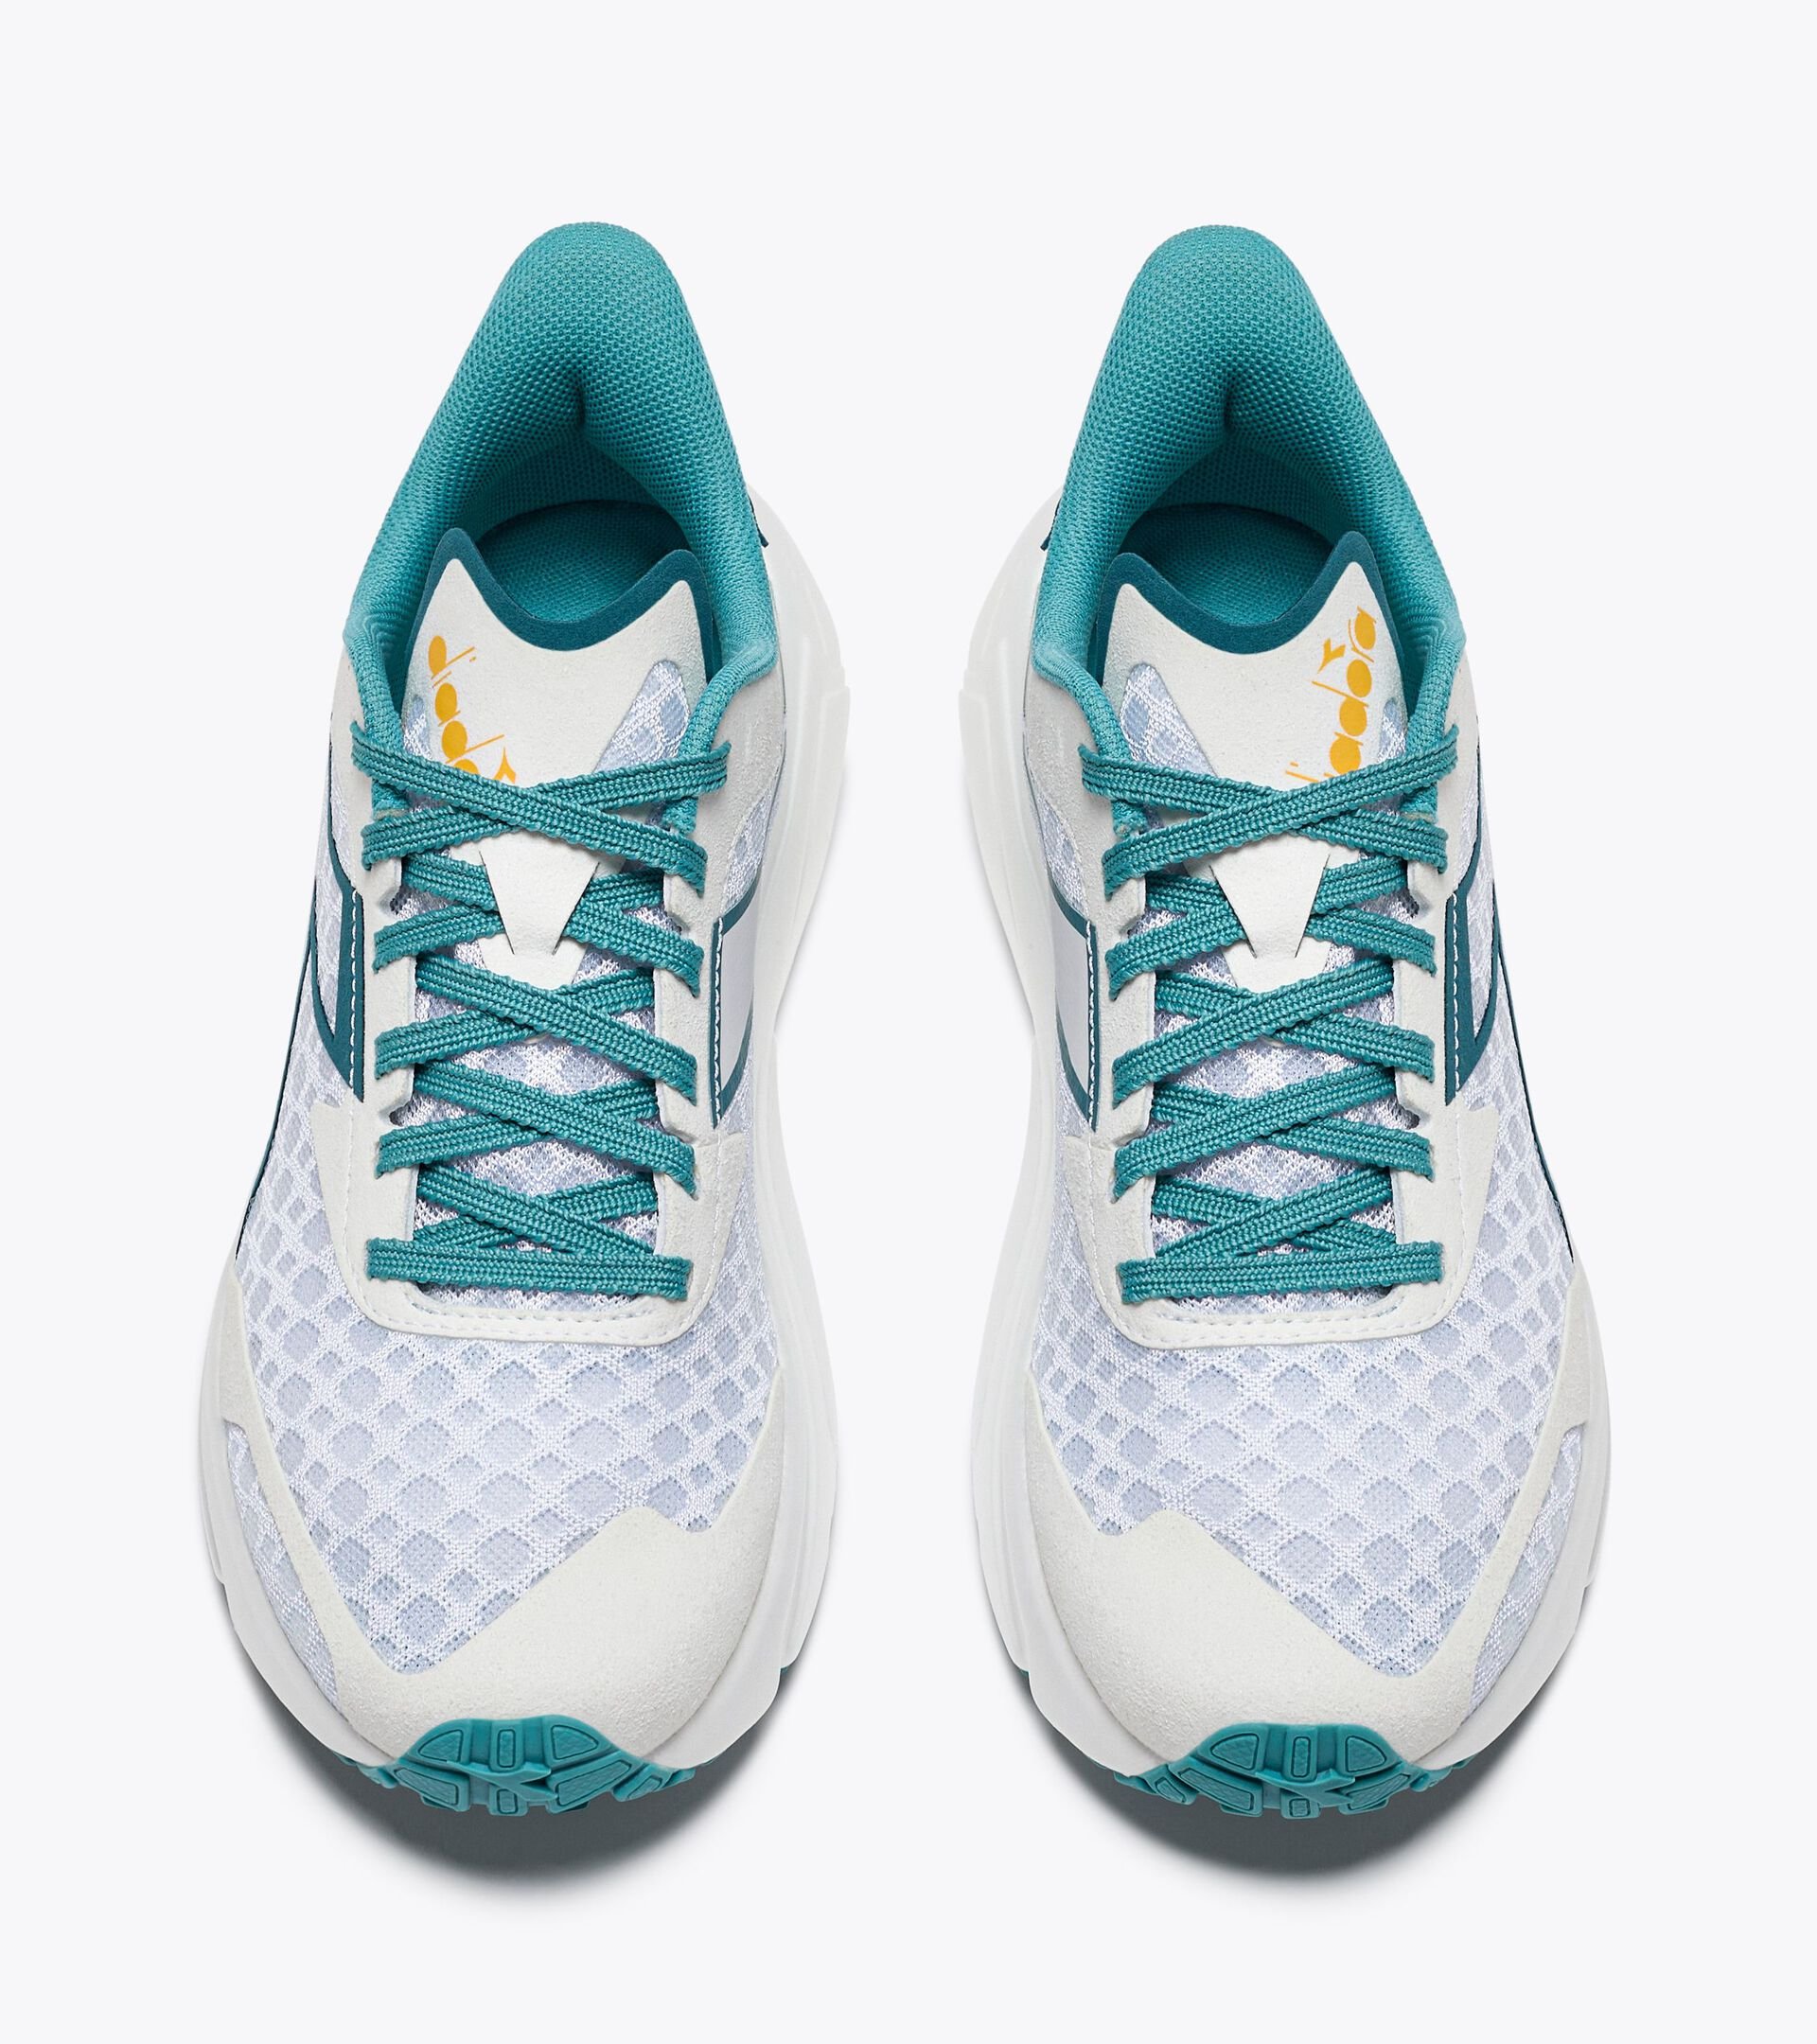 Running shoe - Lightness and reactivity - Women’s FREQUENZA W WHT/COLONIAL BL/DUSTY TURQUOIS - Diadora